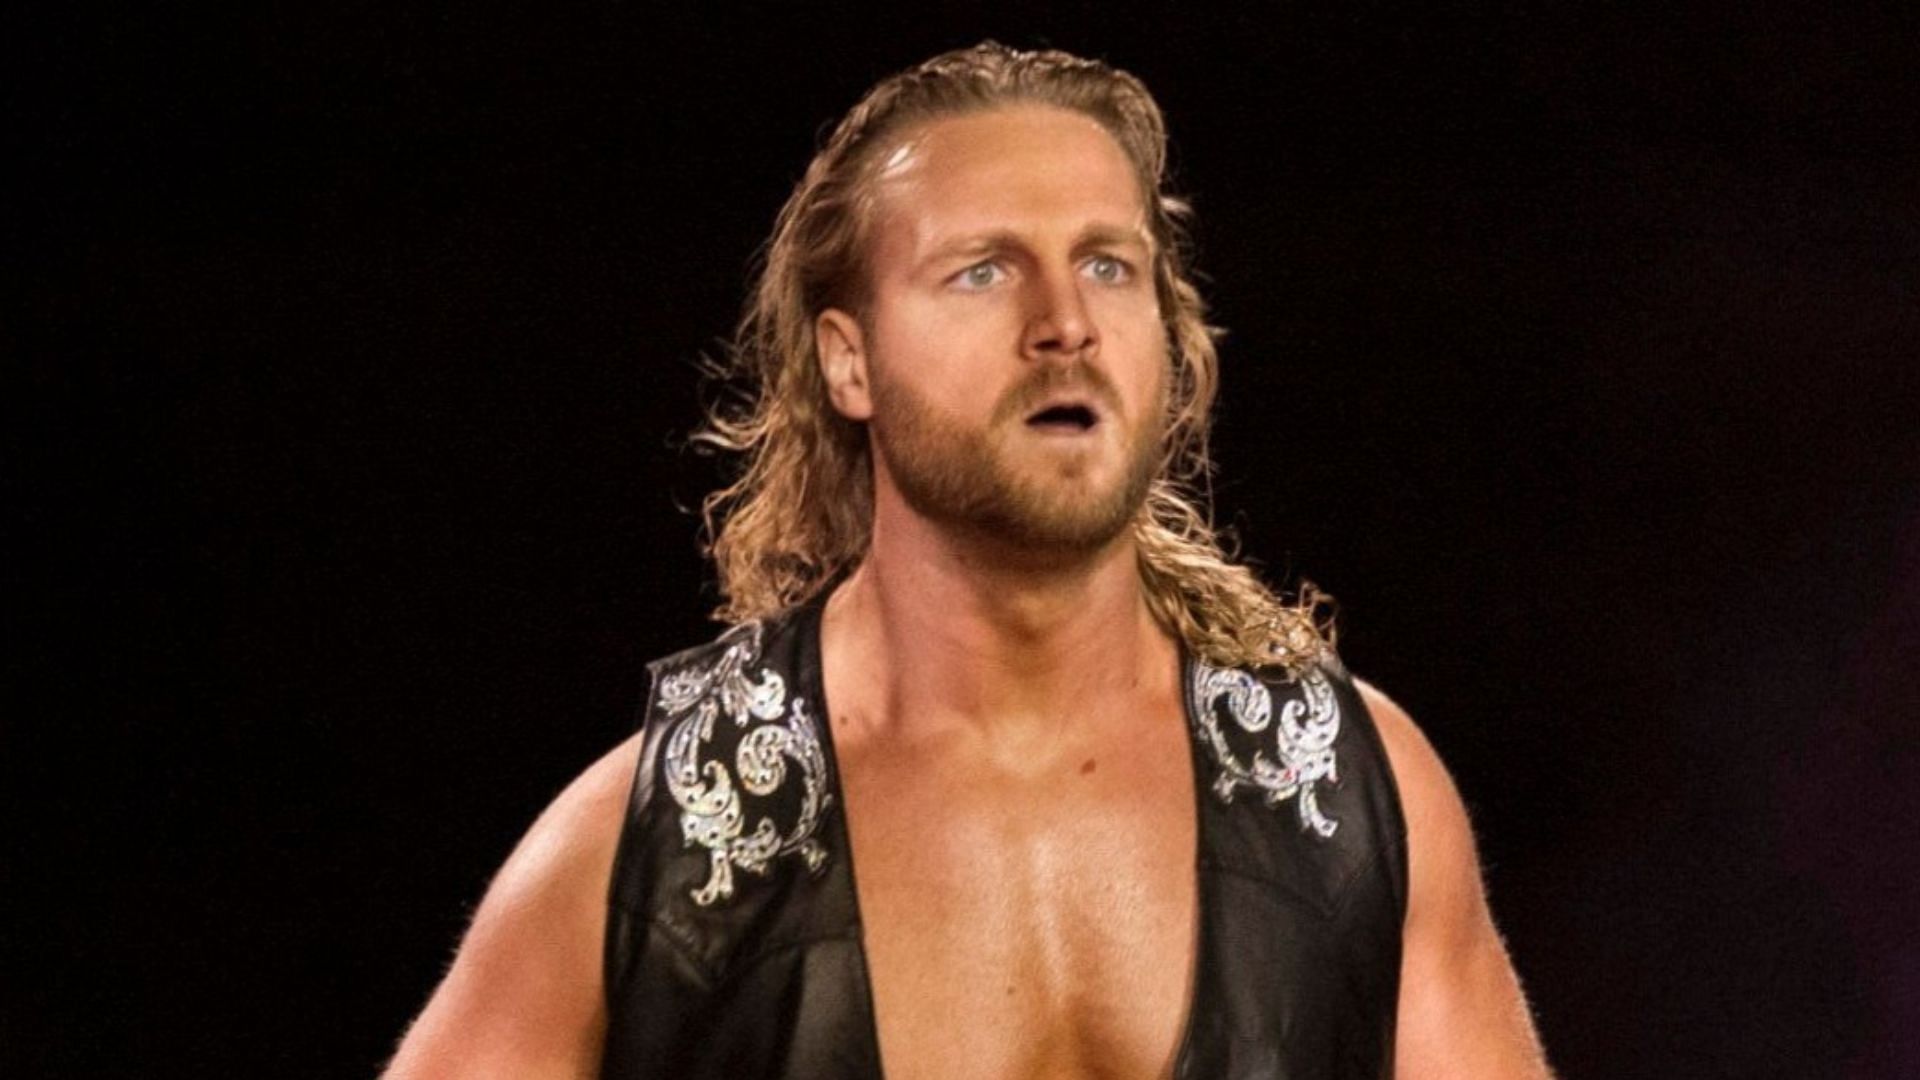 Hangman Page is the former AEW world champion